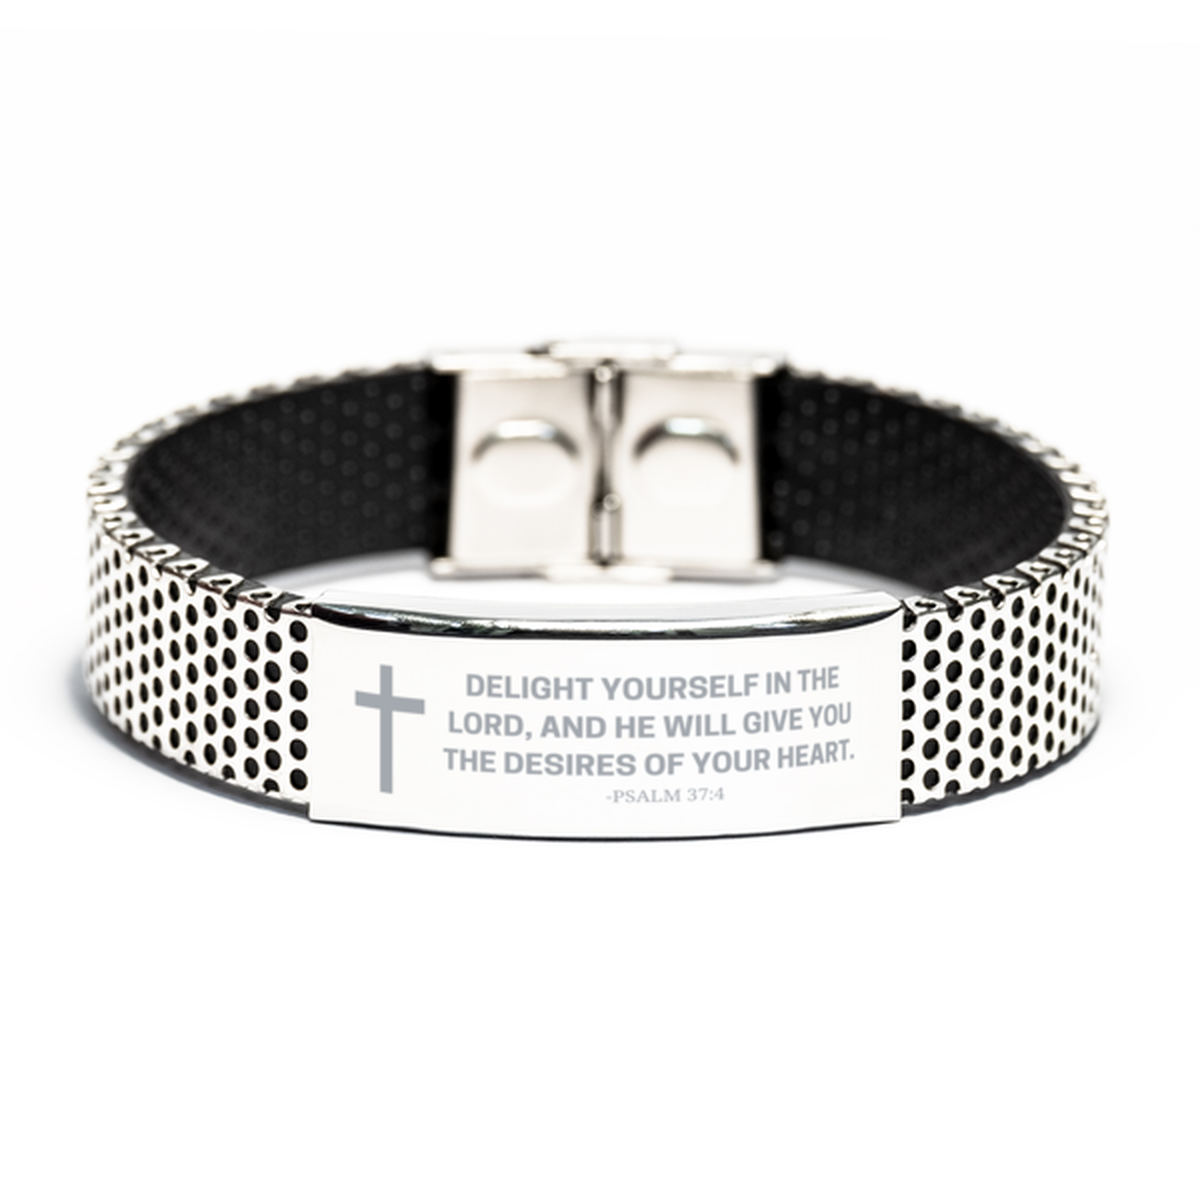 Baptism Gifts For Teenage Boys Girls, Christian Bible Verse Stainless Steel Bracelet, Delight yourself in the Lord, Catholic Confirmation Gifts for Son, Godson, Grandson, Nephew